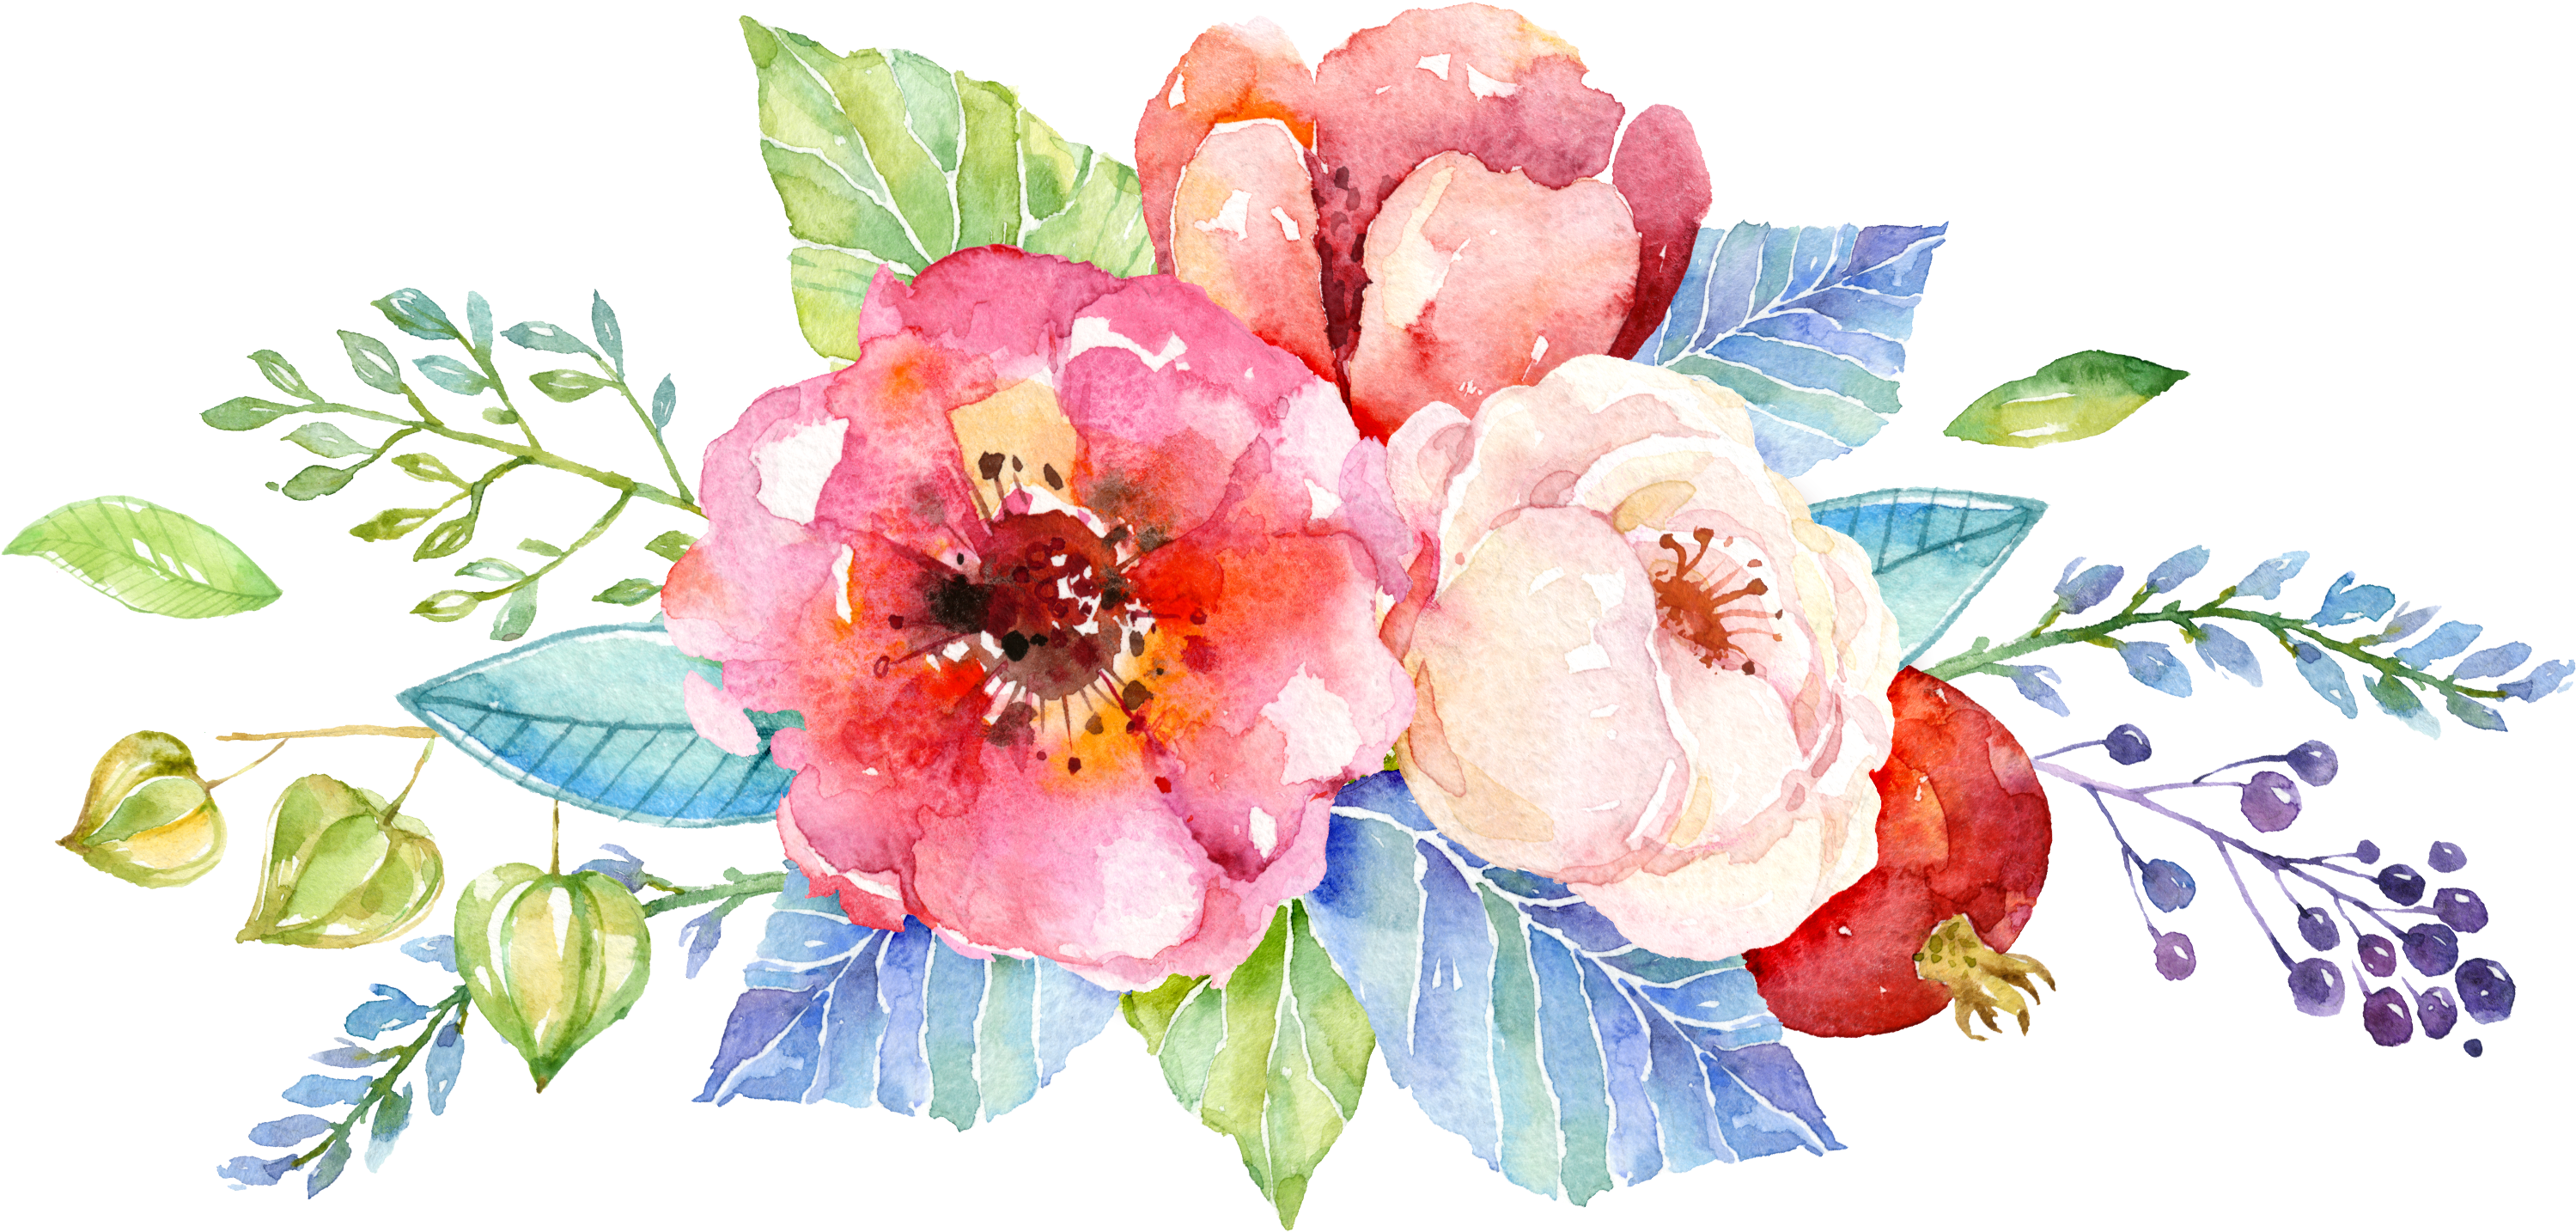 Download Watercolour - Watercolor Flower Background Design PNG Image with No Background - PNGkey.com